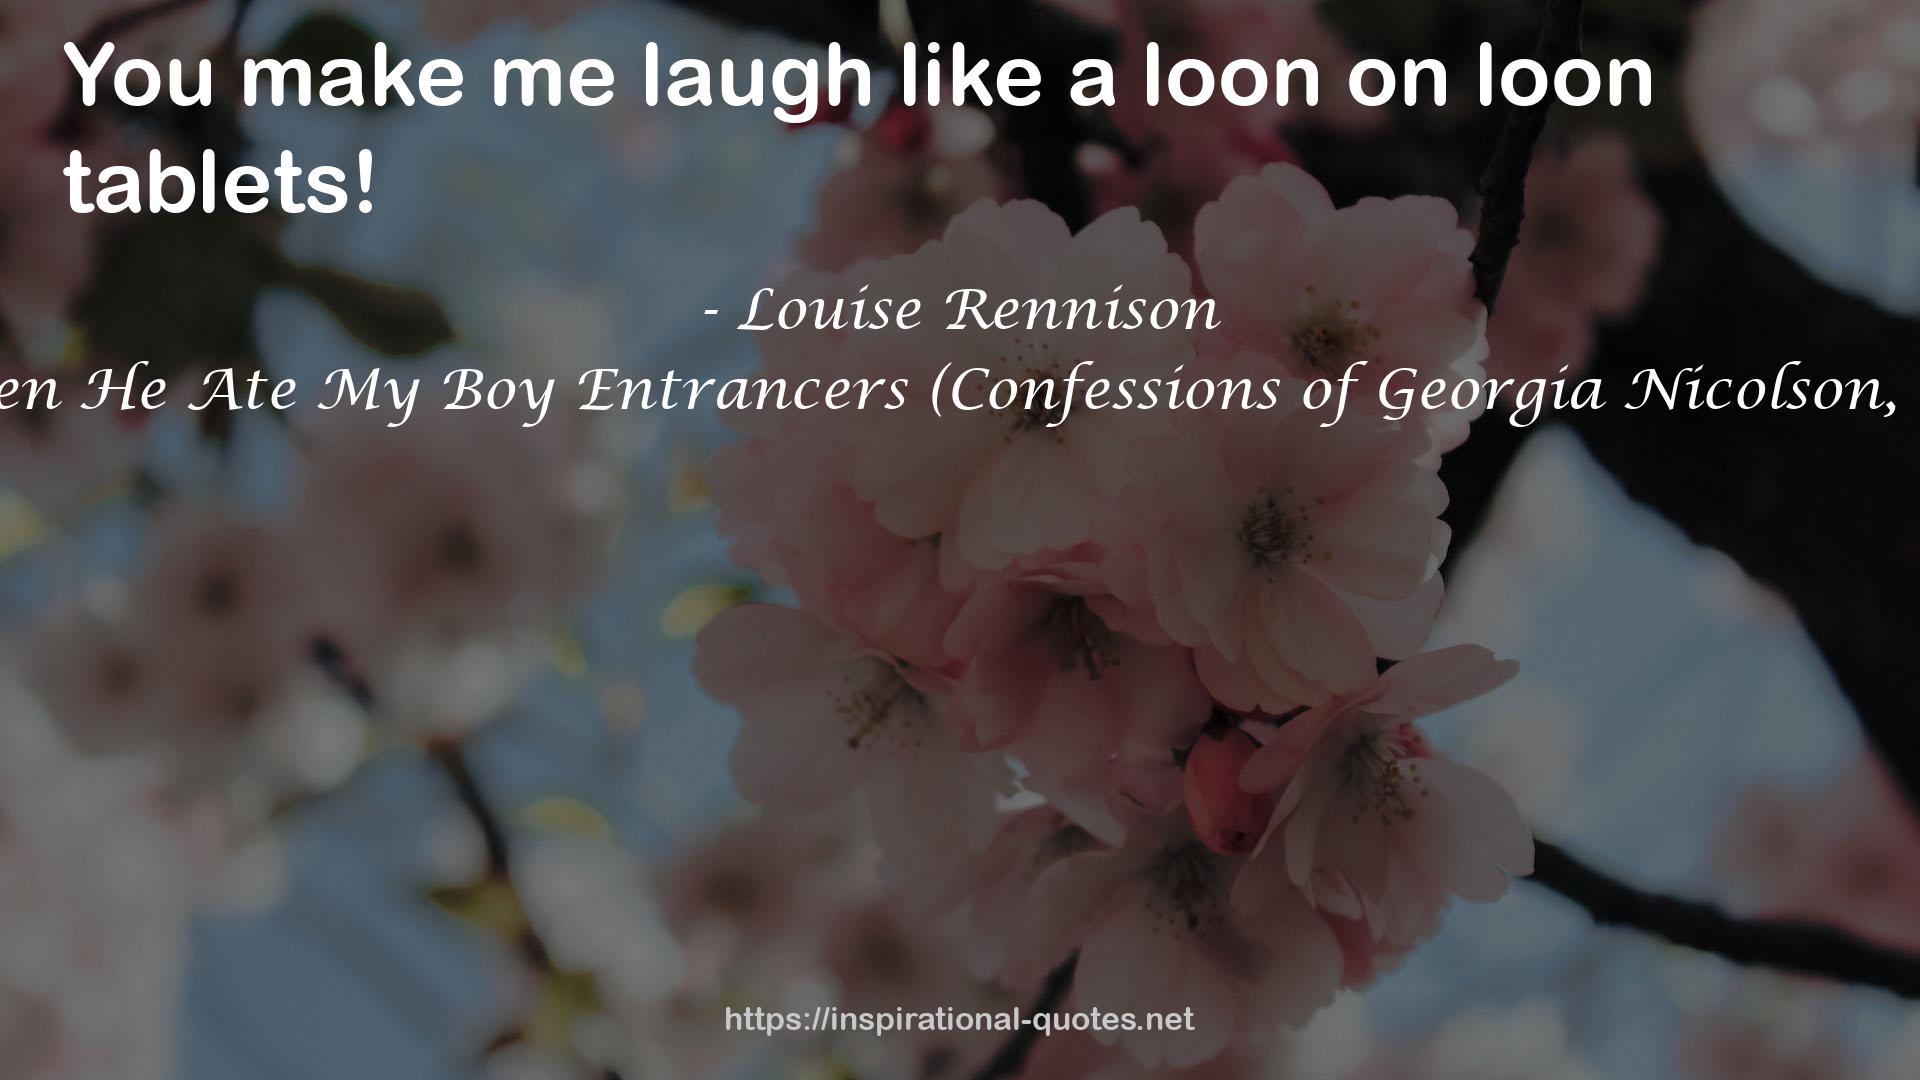 Then He Ate My Boy Entrancers (Confessions of Georgia Nicolson, #6) QUOTES